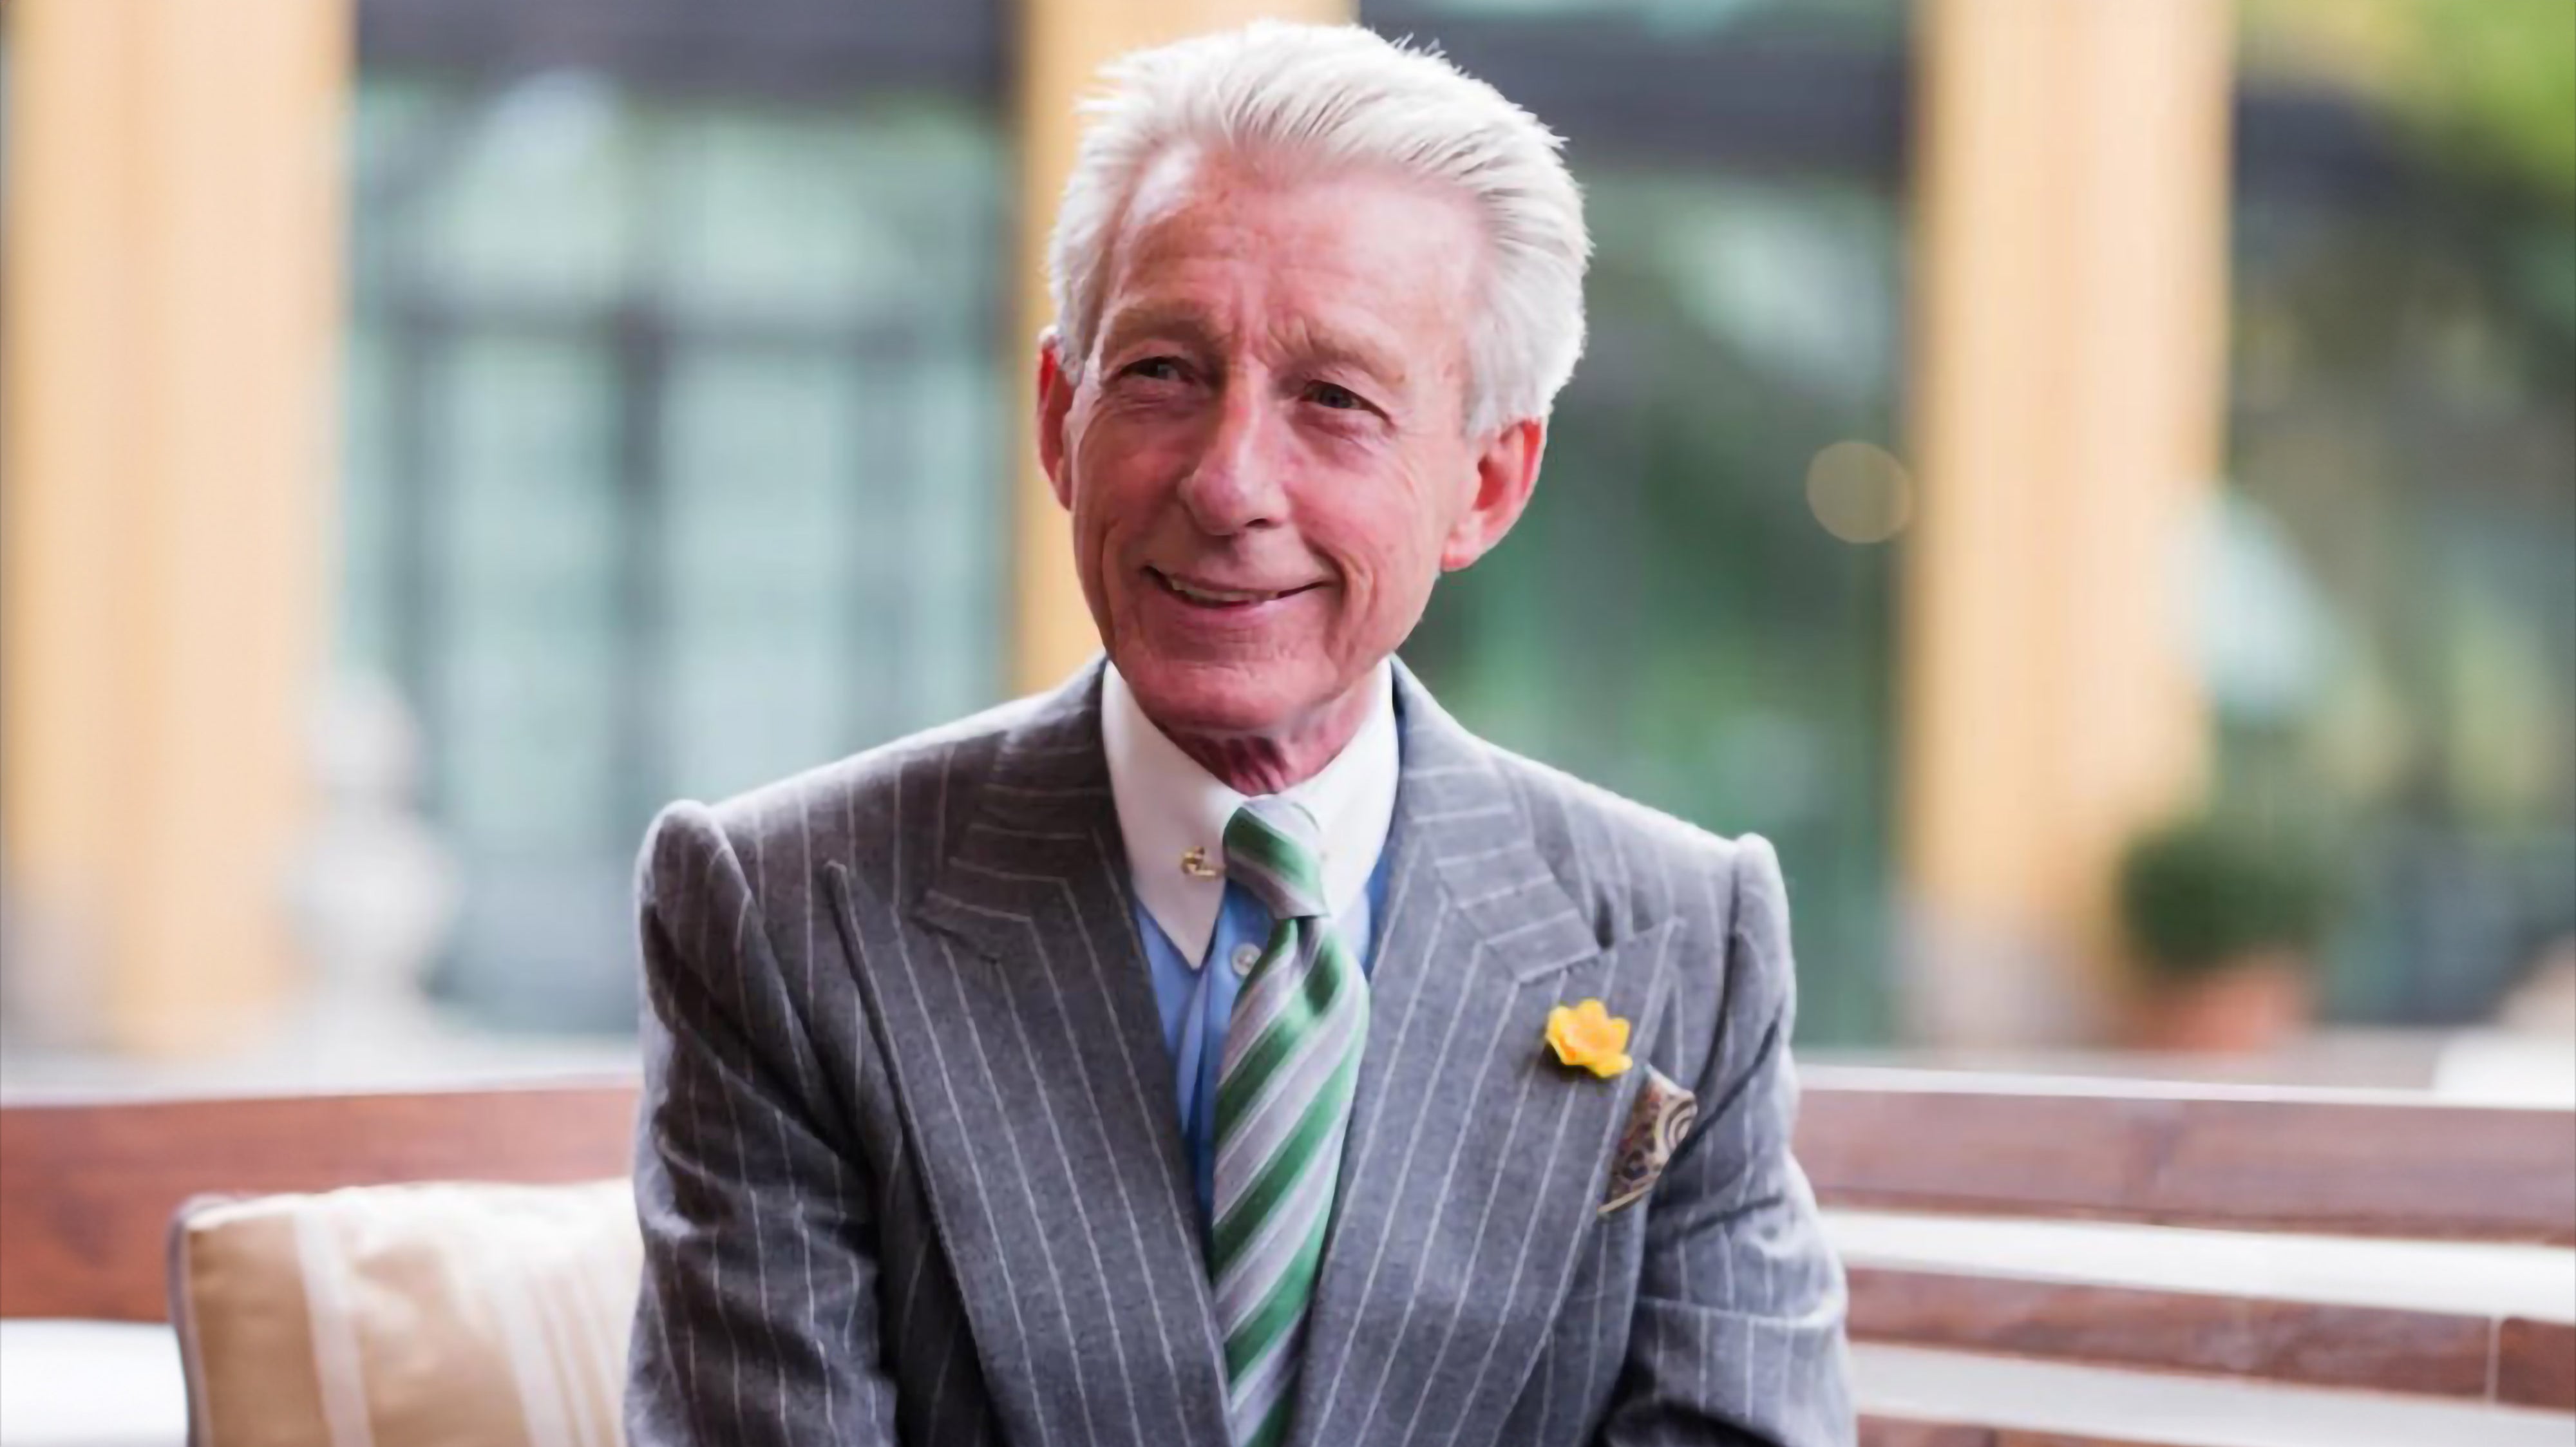 Edward Sexton, influential figure in bespoke tailoring and menswear, in a custom suit